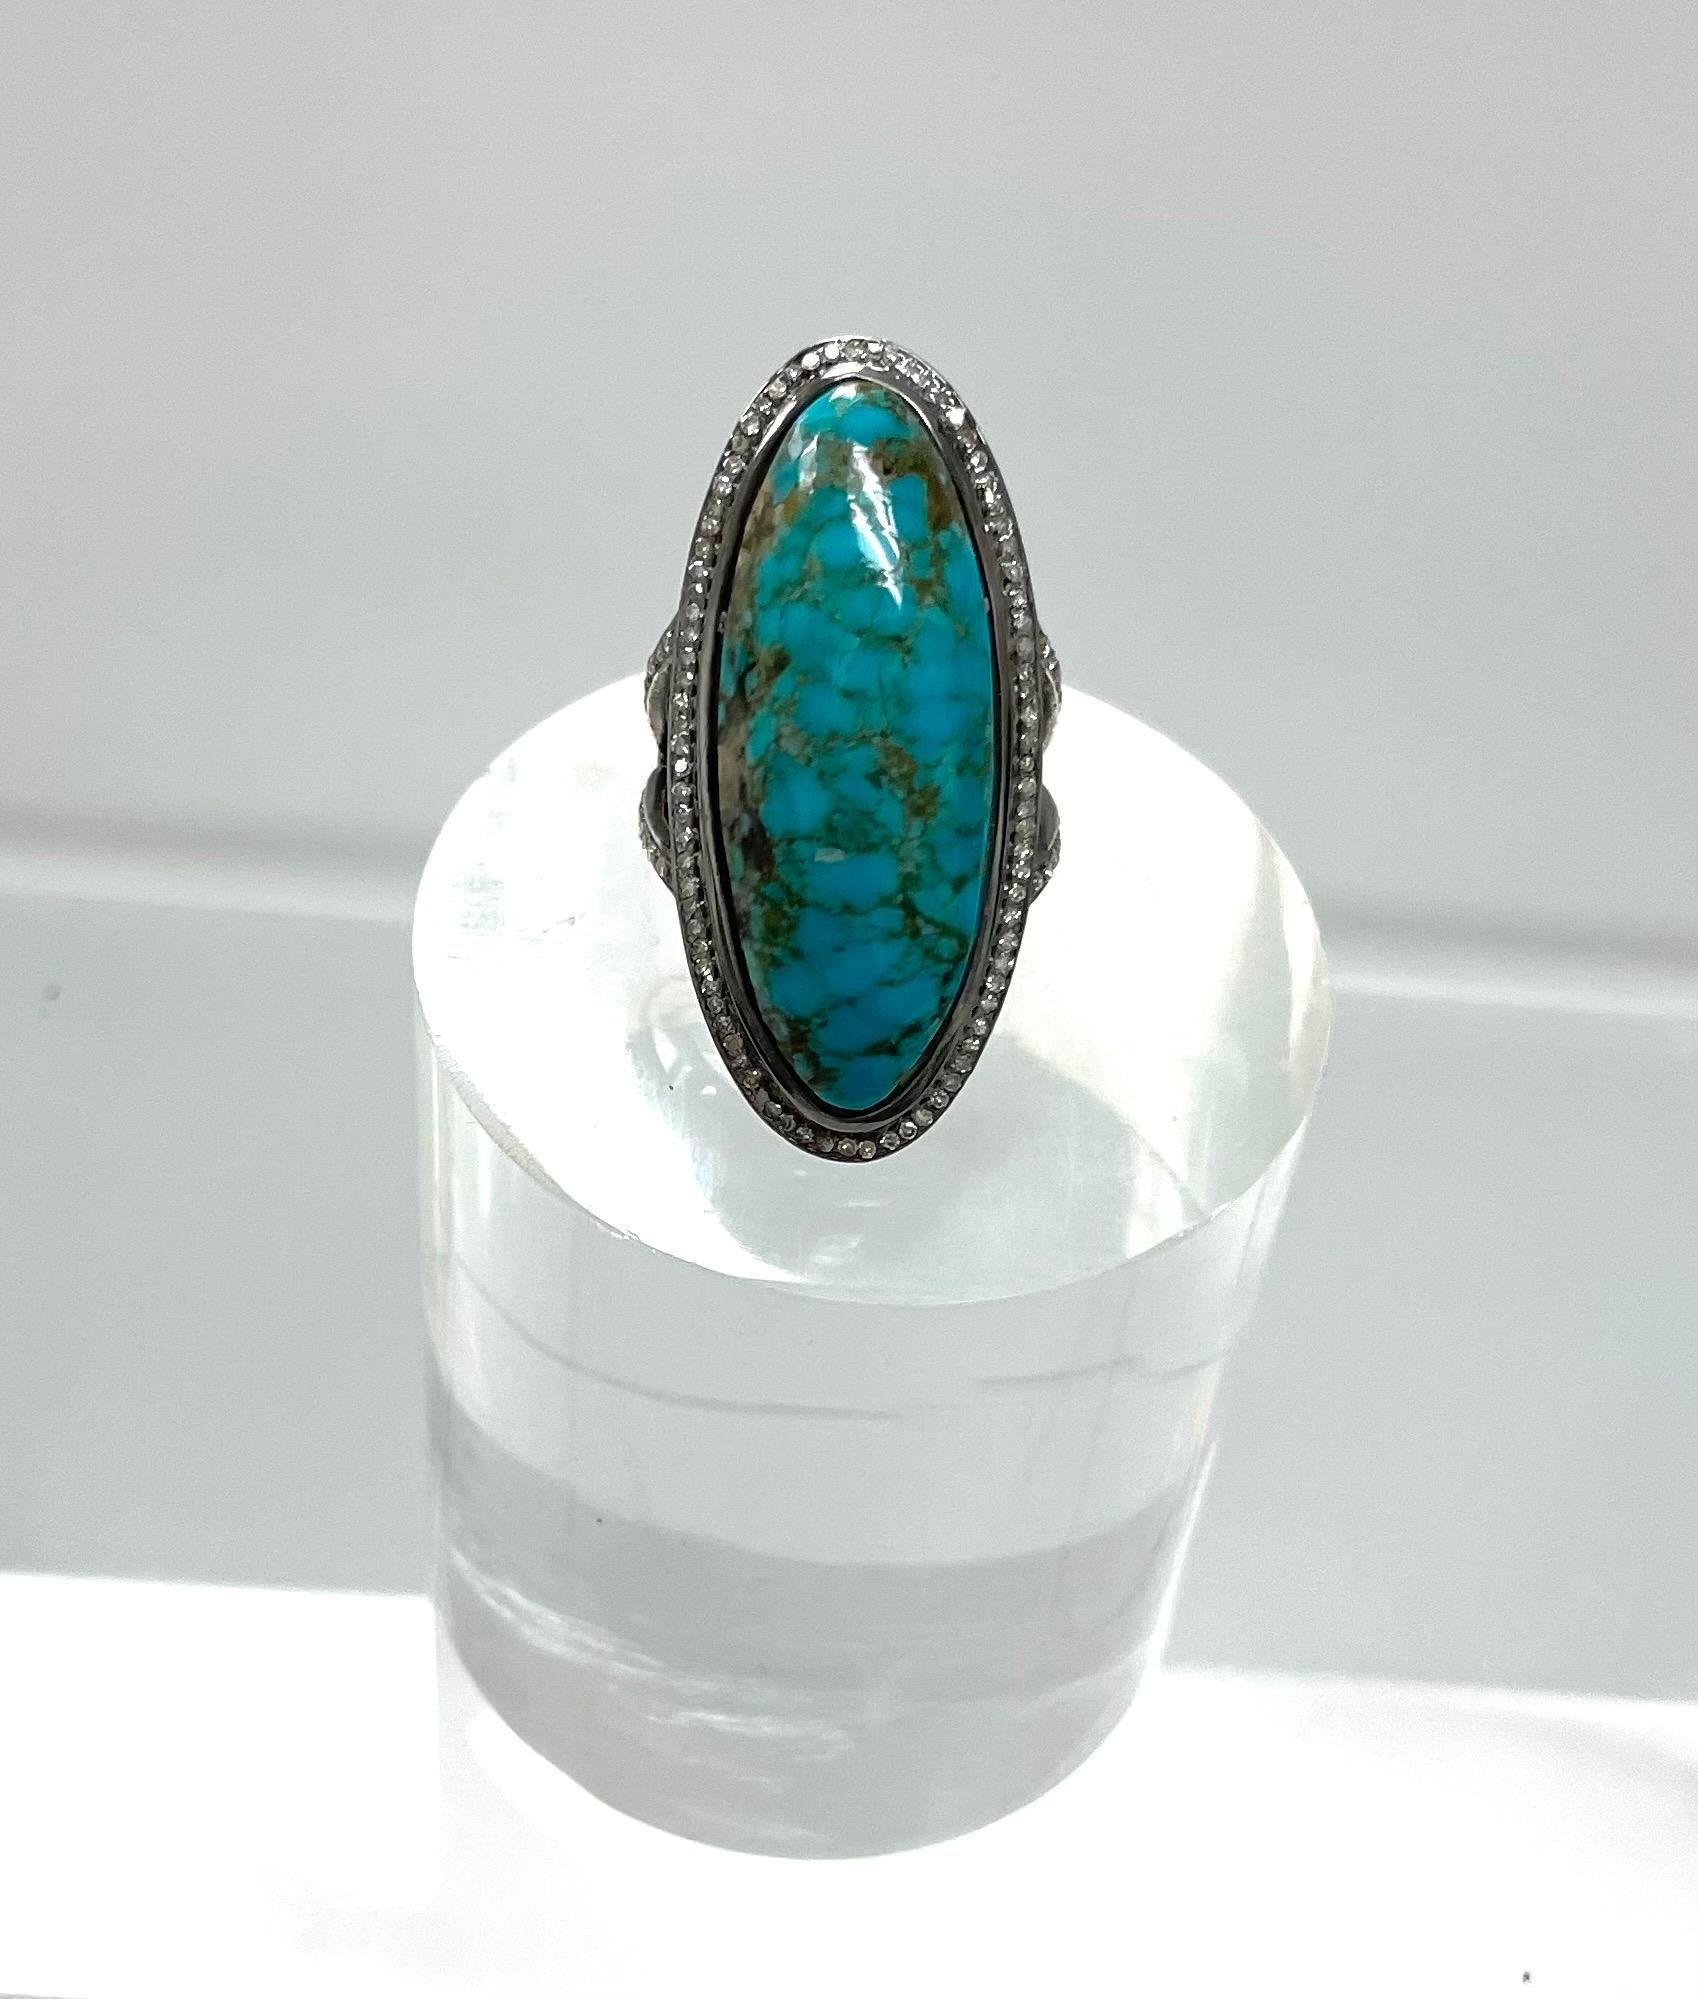 Description
Large and striking ring, featuring an Arizona turquoise high dome cabochon with beautiful matrix, framed in a pave diamond setting and a fashionable pave diamond Y-shaped band.
Item #R131

Materials and Weight
Turquoise 24cts, 36x14x7.29